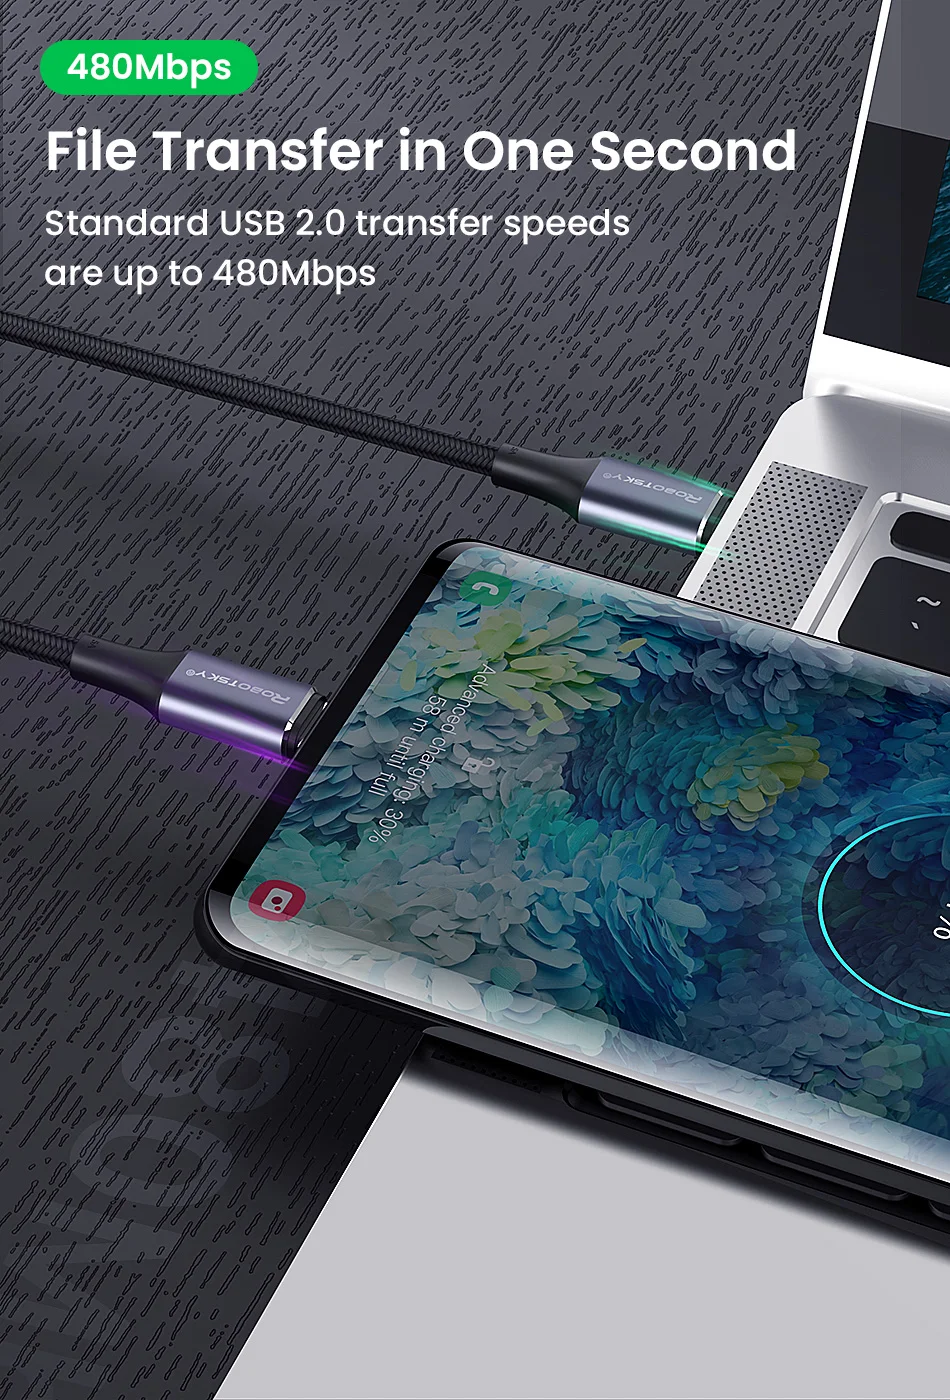 android charger type PD 100W USB C to USB Type C Cable For Xiaomi Redmi Note 8 Pro Quick Charge 4.0 Fast Charging For MacBook Pro Data Cable Cord iphone usb cable